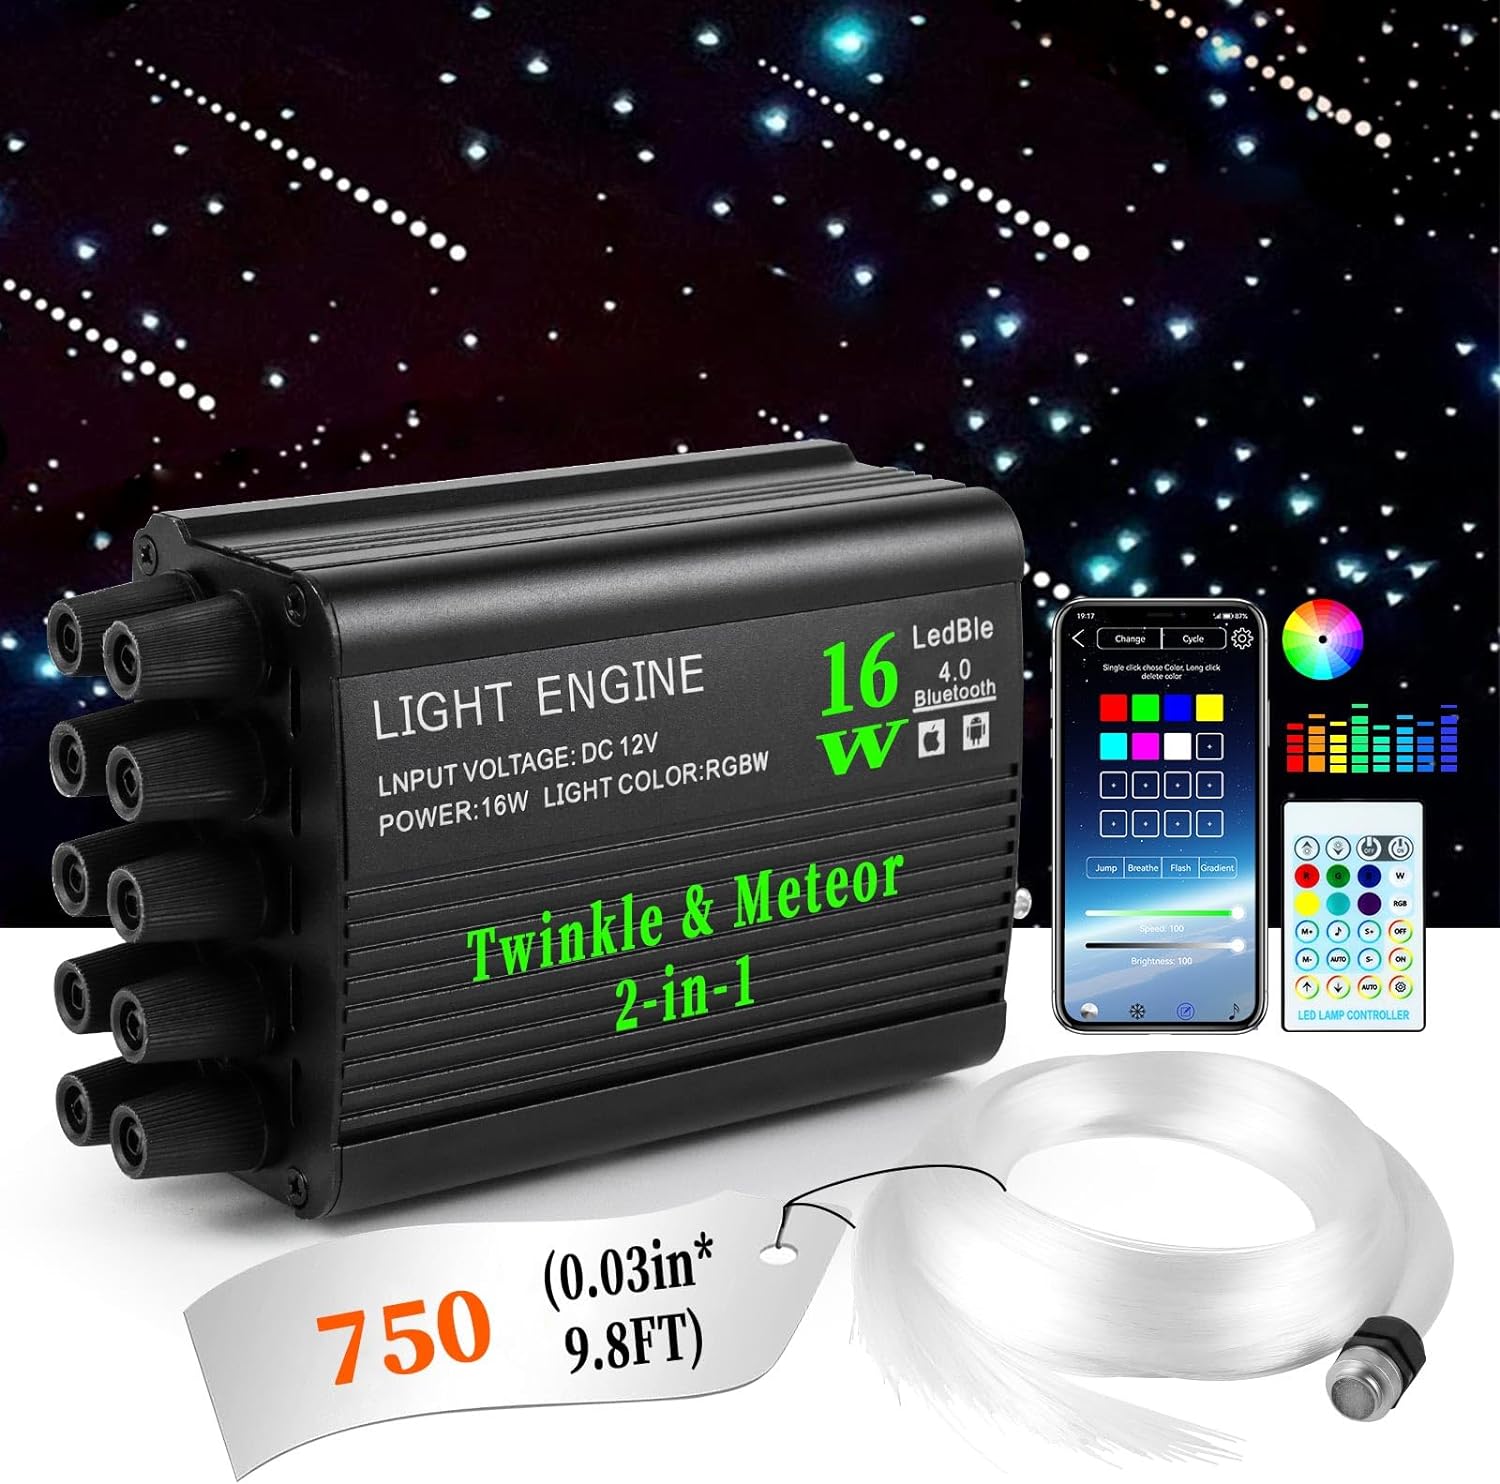 16W RGBW Twinkle & Shooting Star 2-in-1 Rolls Royce Star Lights for Car Truck SUV with Bluetooth APP and RF Control | StarlightHeadliners.shop